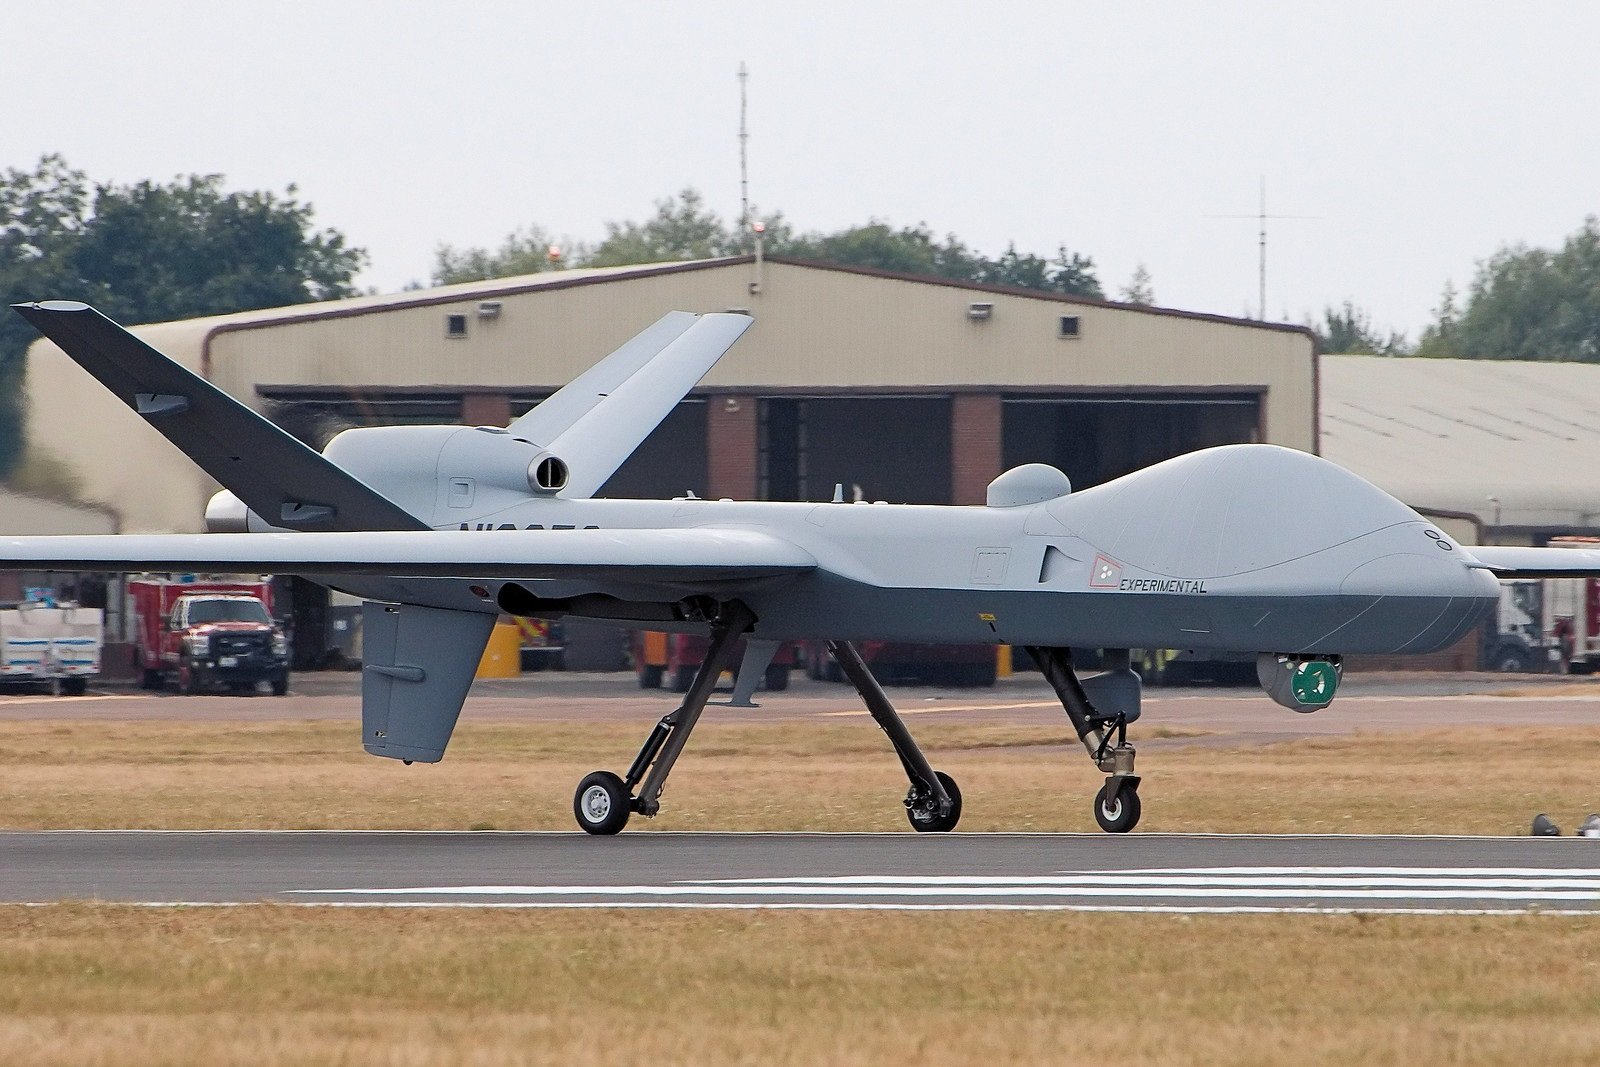 Chinese 'Killer' Drones Are Falling Out Of Style In The Middle East | The National Interest